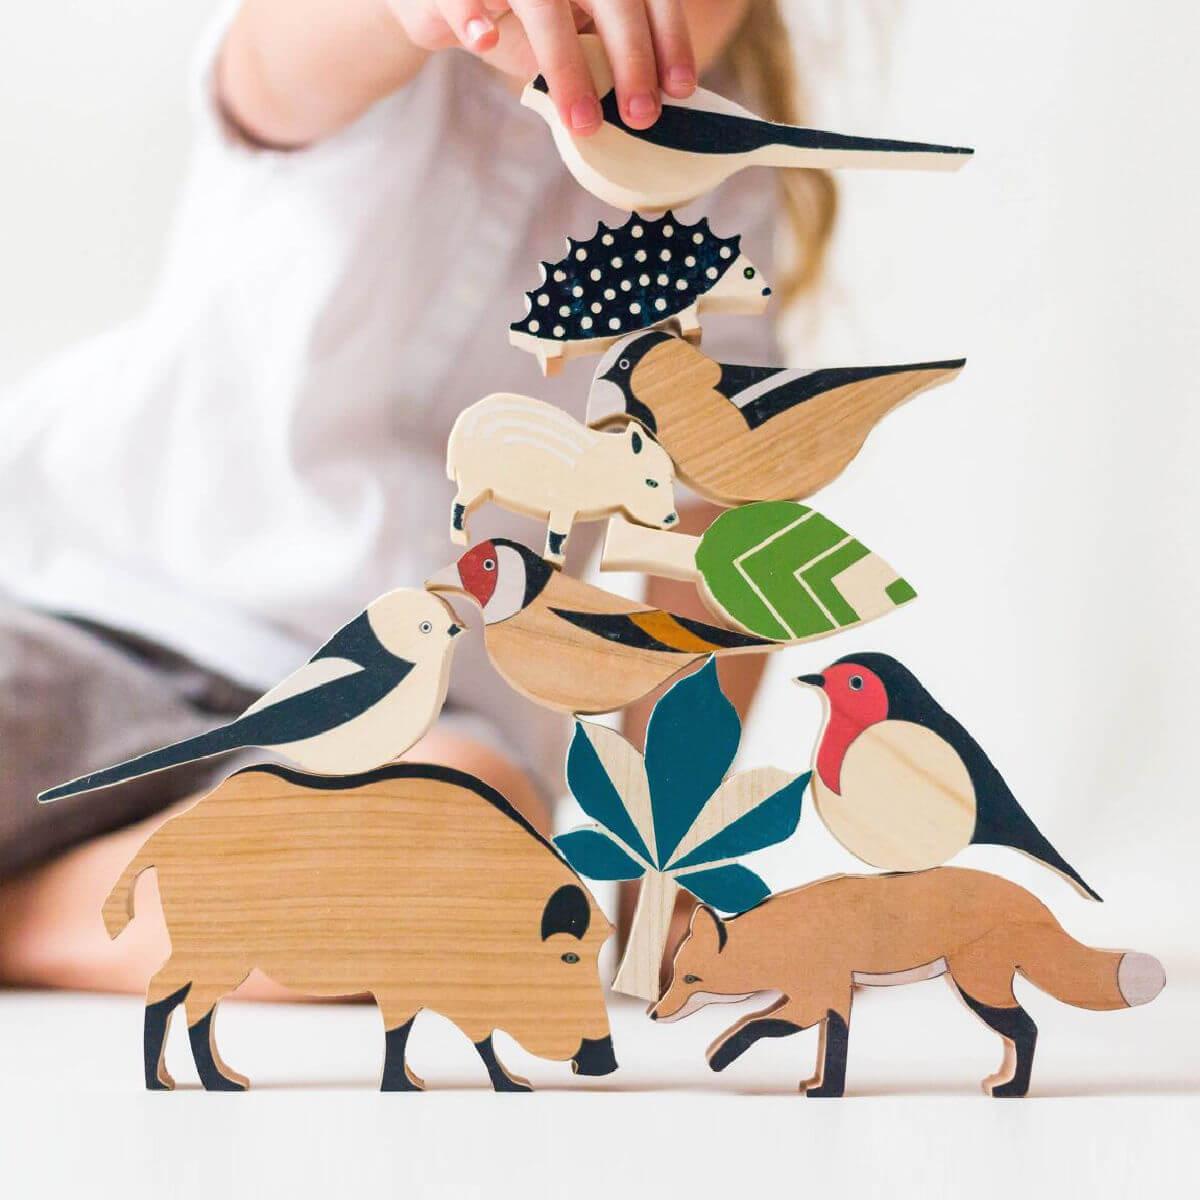 Eperfa toys the hillside forest wooden animals set, wooden toys UK